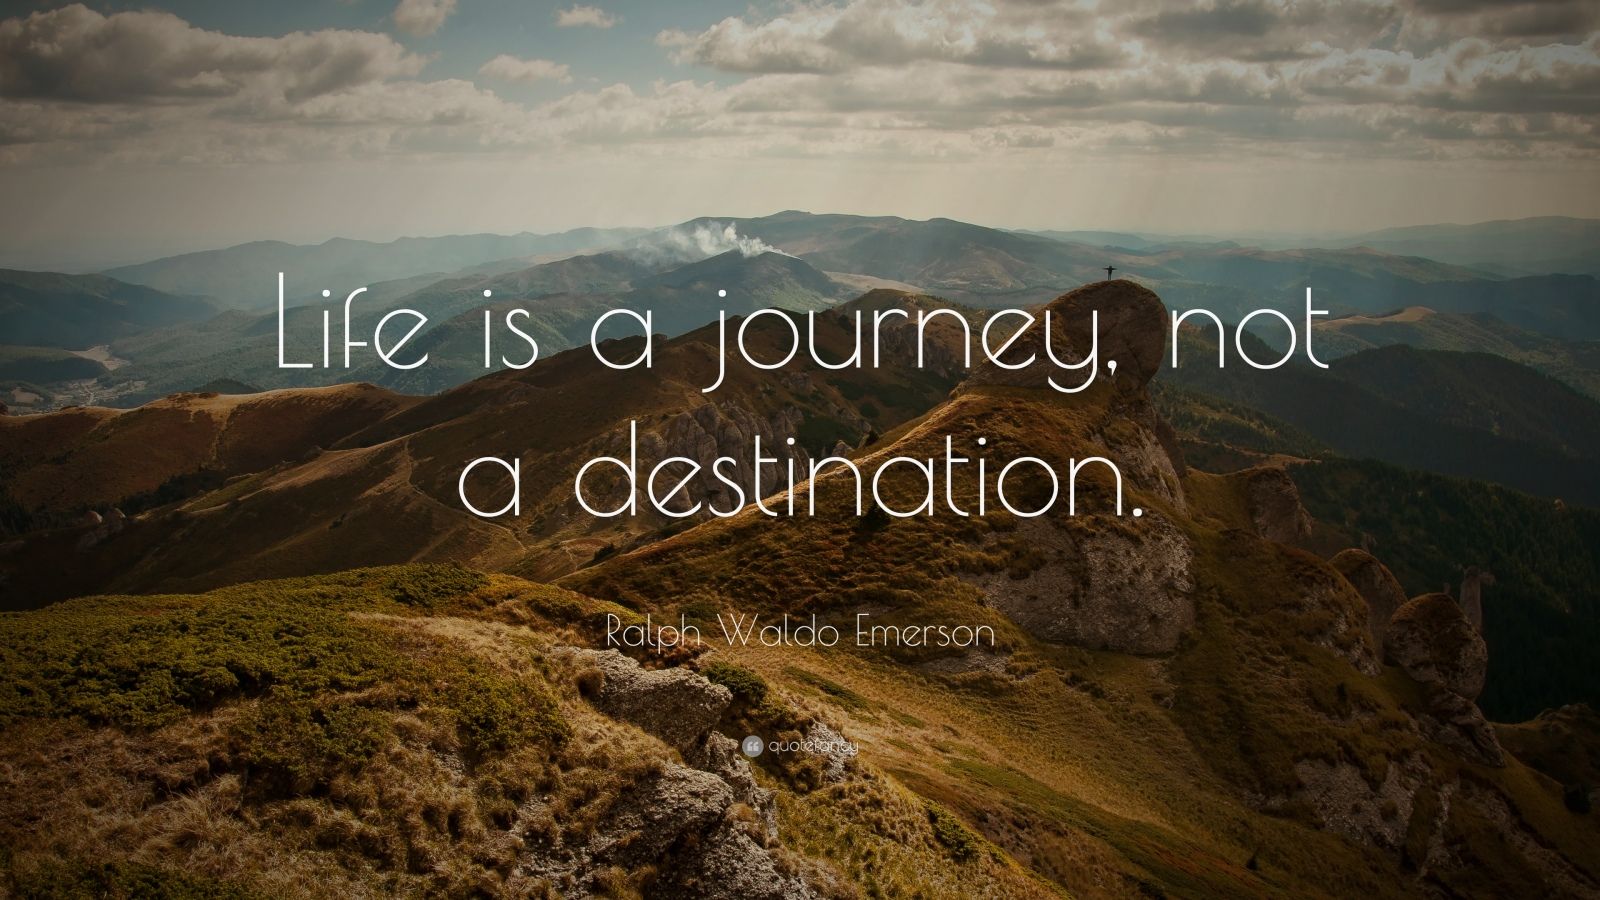 Ralph Waldo Emerson Quote: “Life is a journey, not a destination.” (12